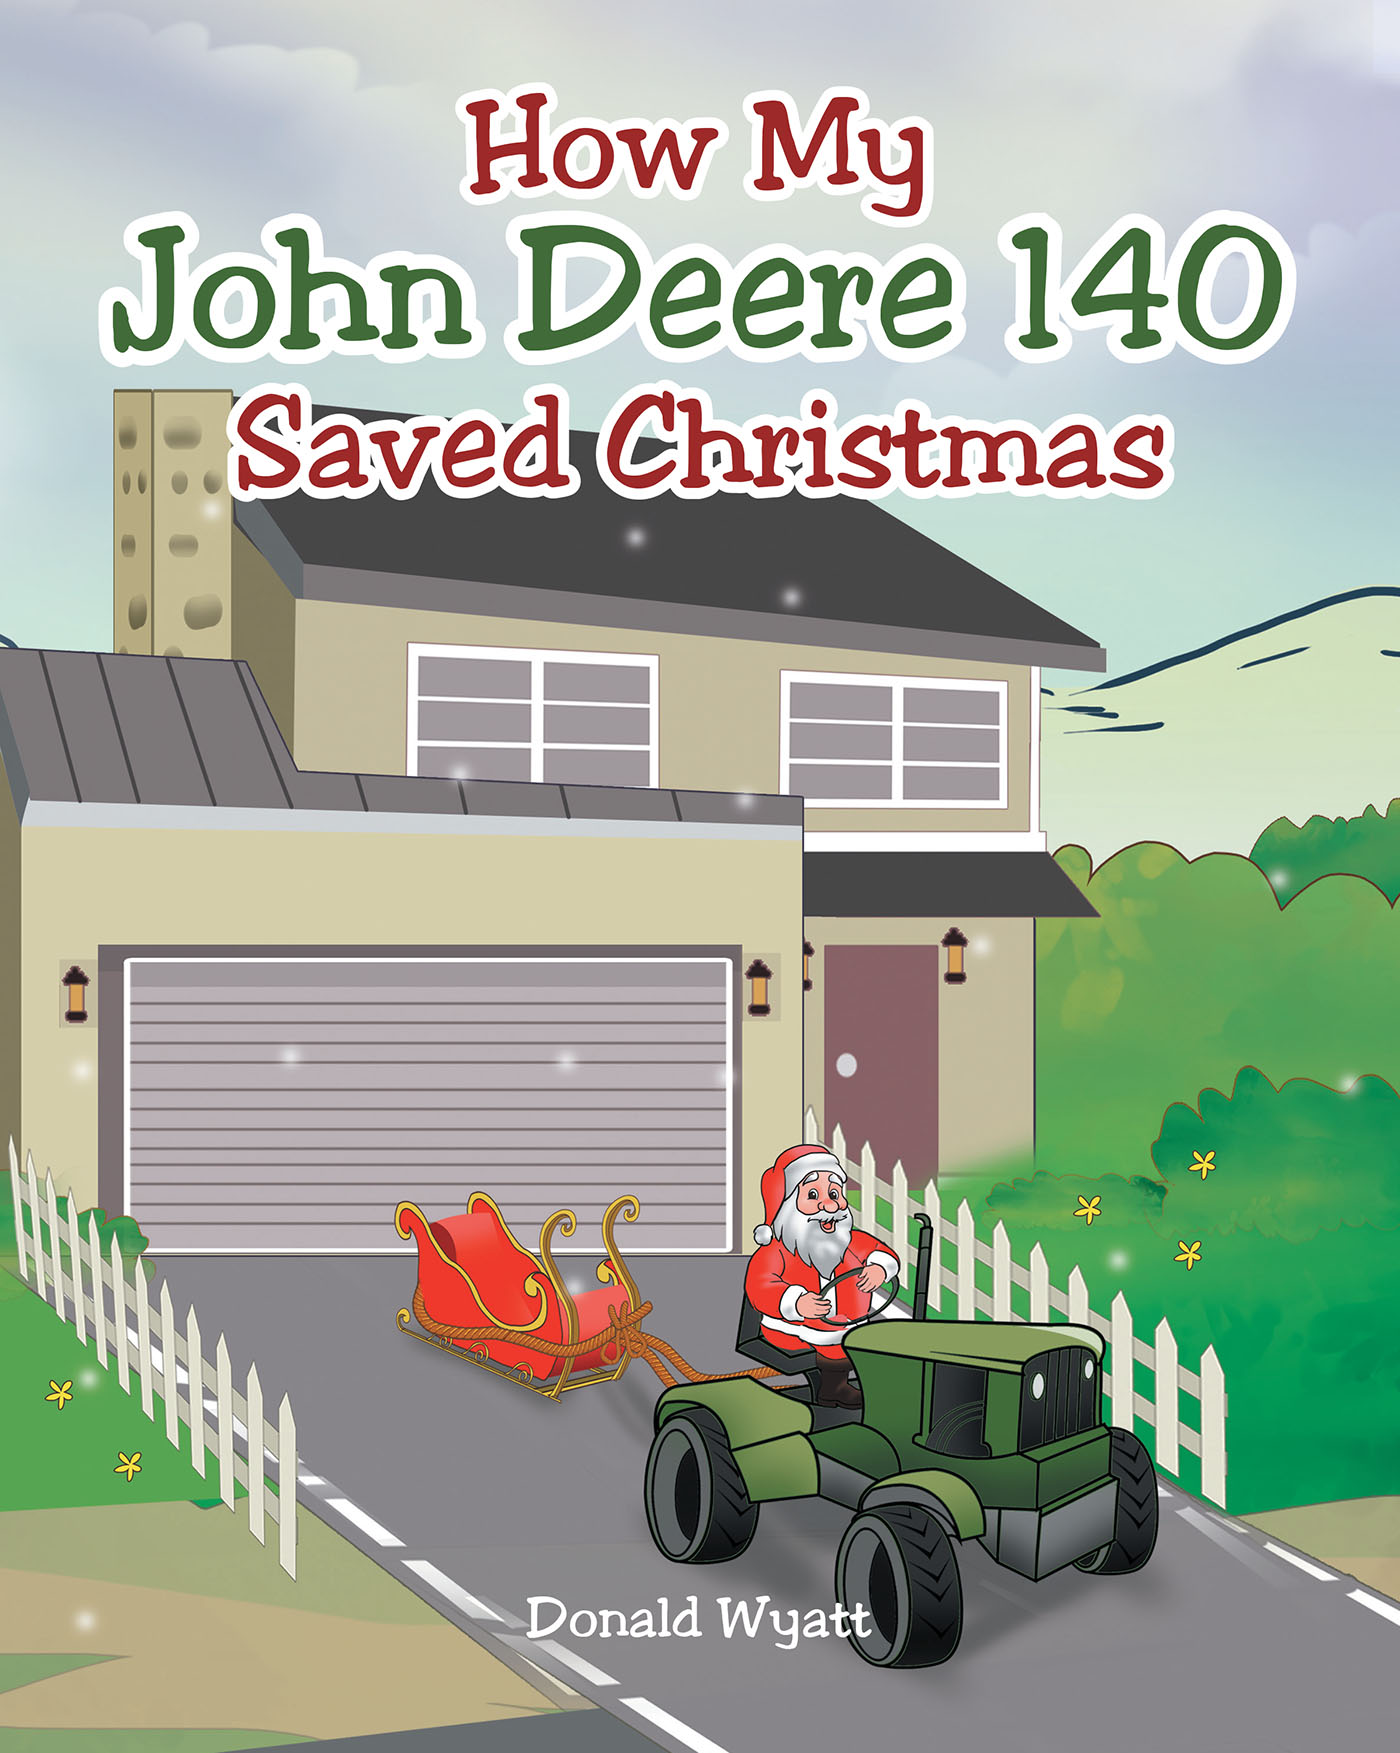 Donald Wyatt’s New Book, "How My John Deere 140 Saved Christmas," is a Cheerful Holiday Tale About an Unlikely Hero Helping Santa Get His Delivery Schedule Back on Track